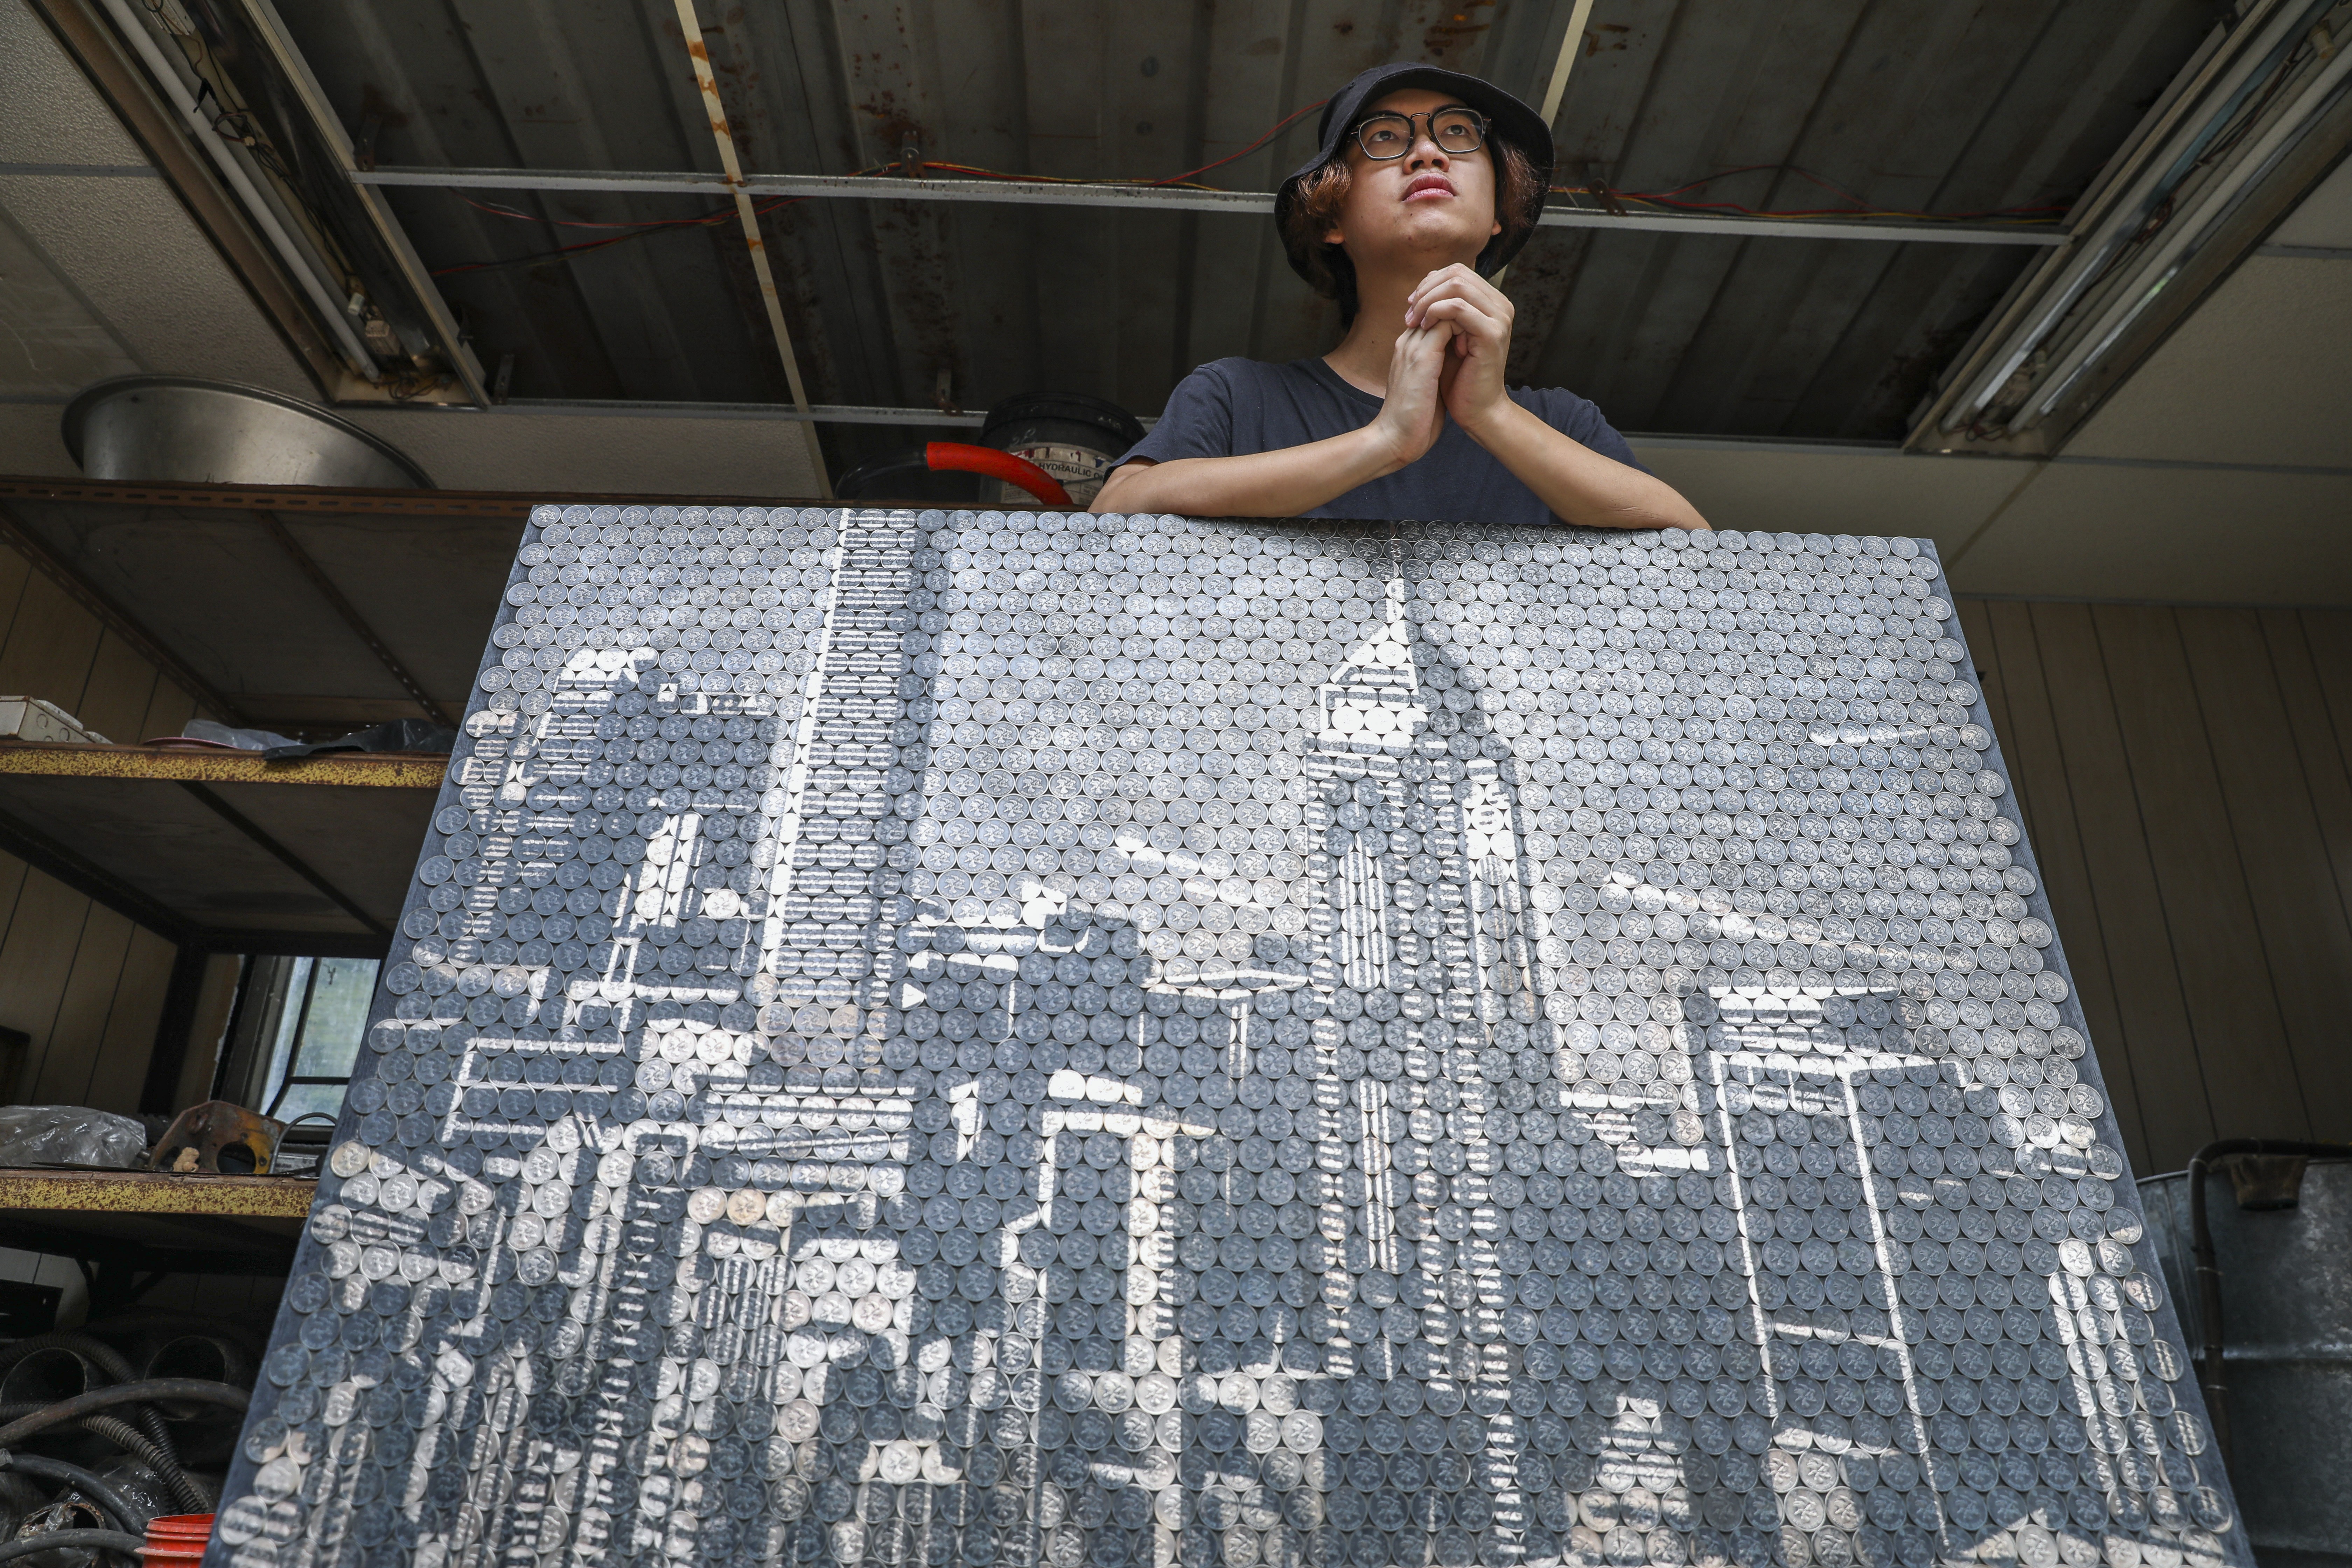 Giraffe Leung uses HK$1 coins to recreate the skyline of Hong Kong’s moneyed Central district. Photo: Nora Tam